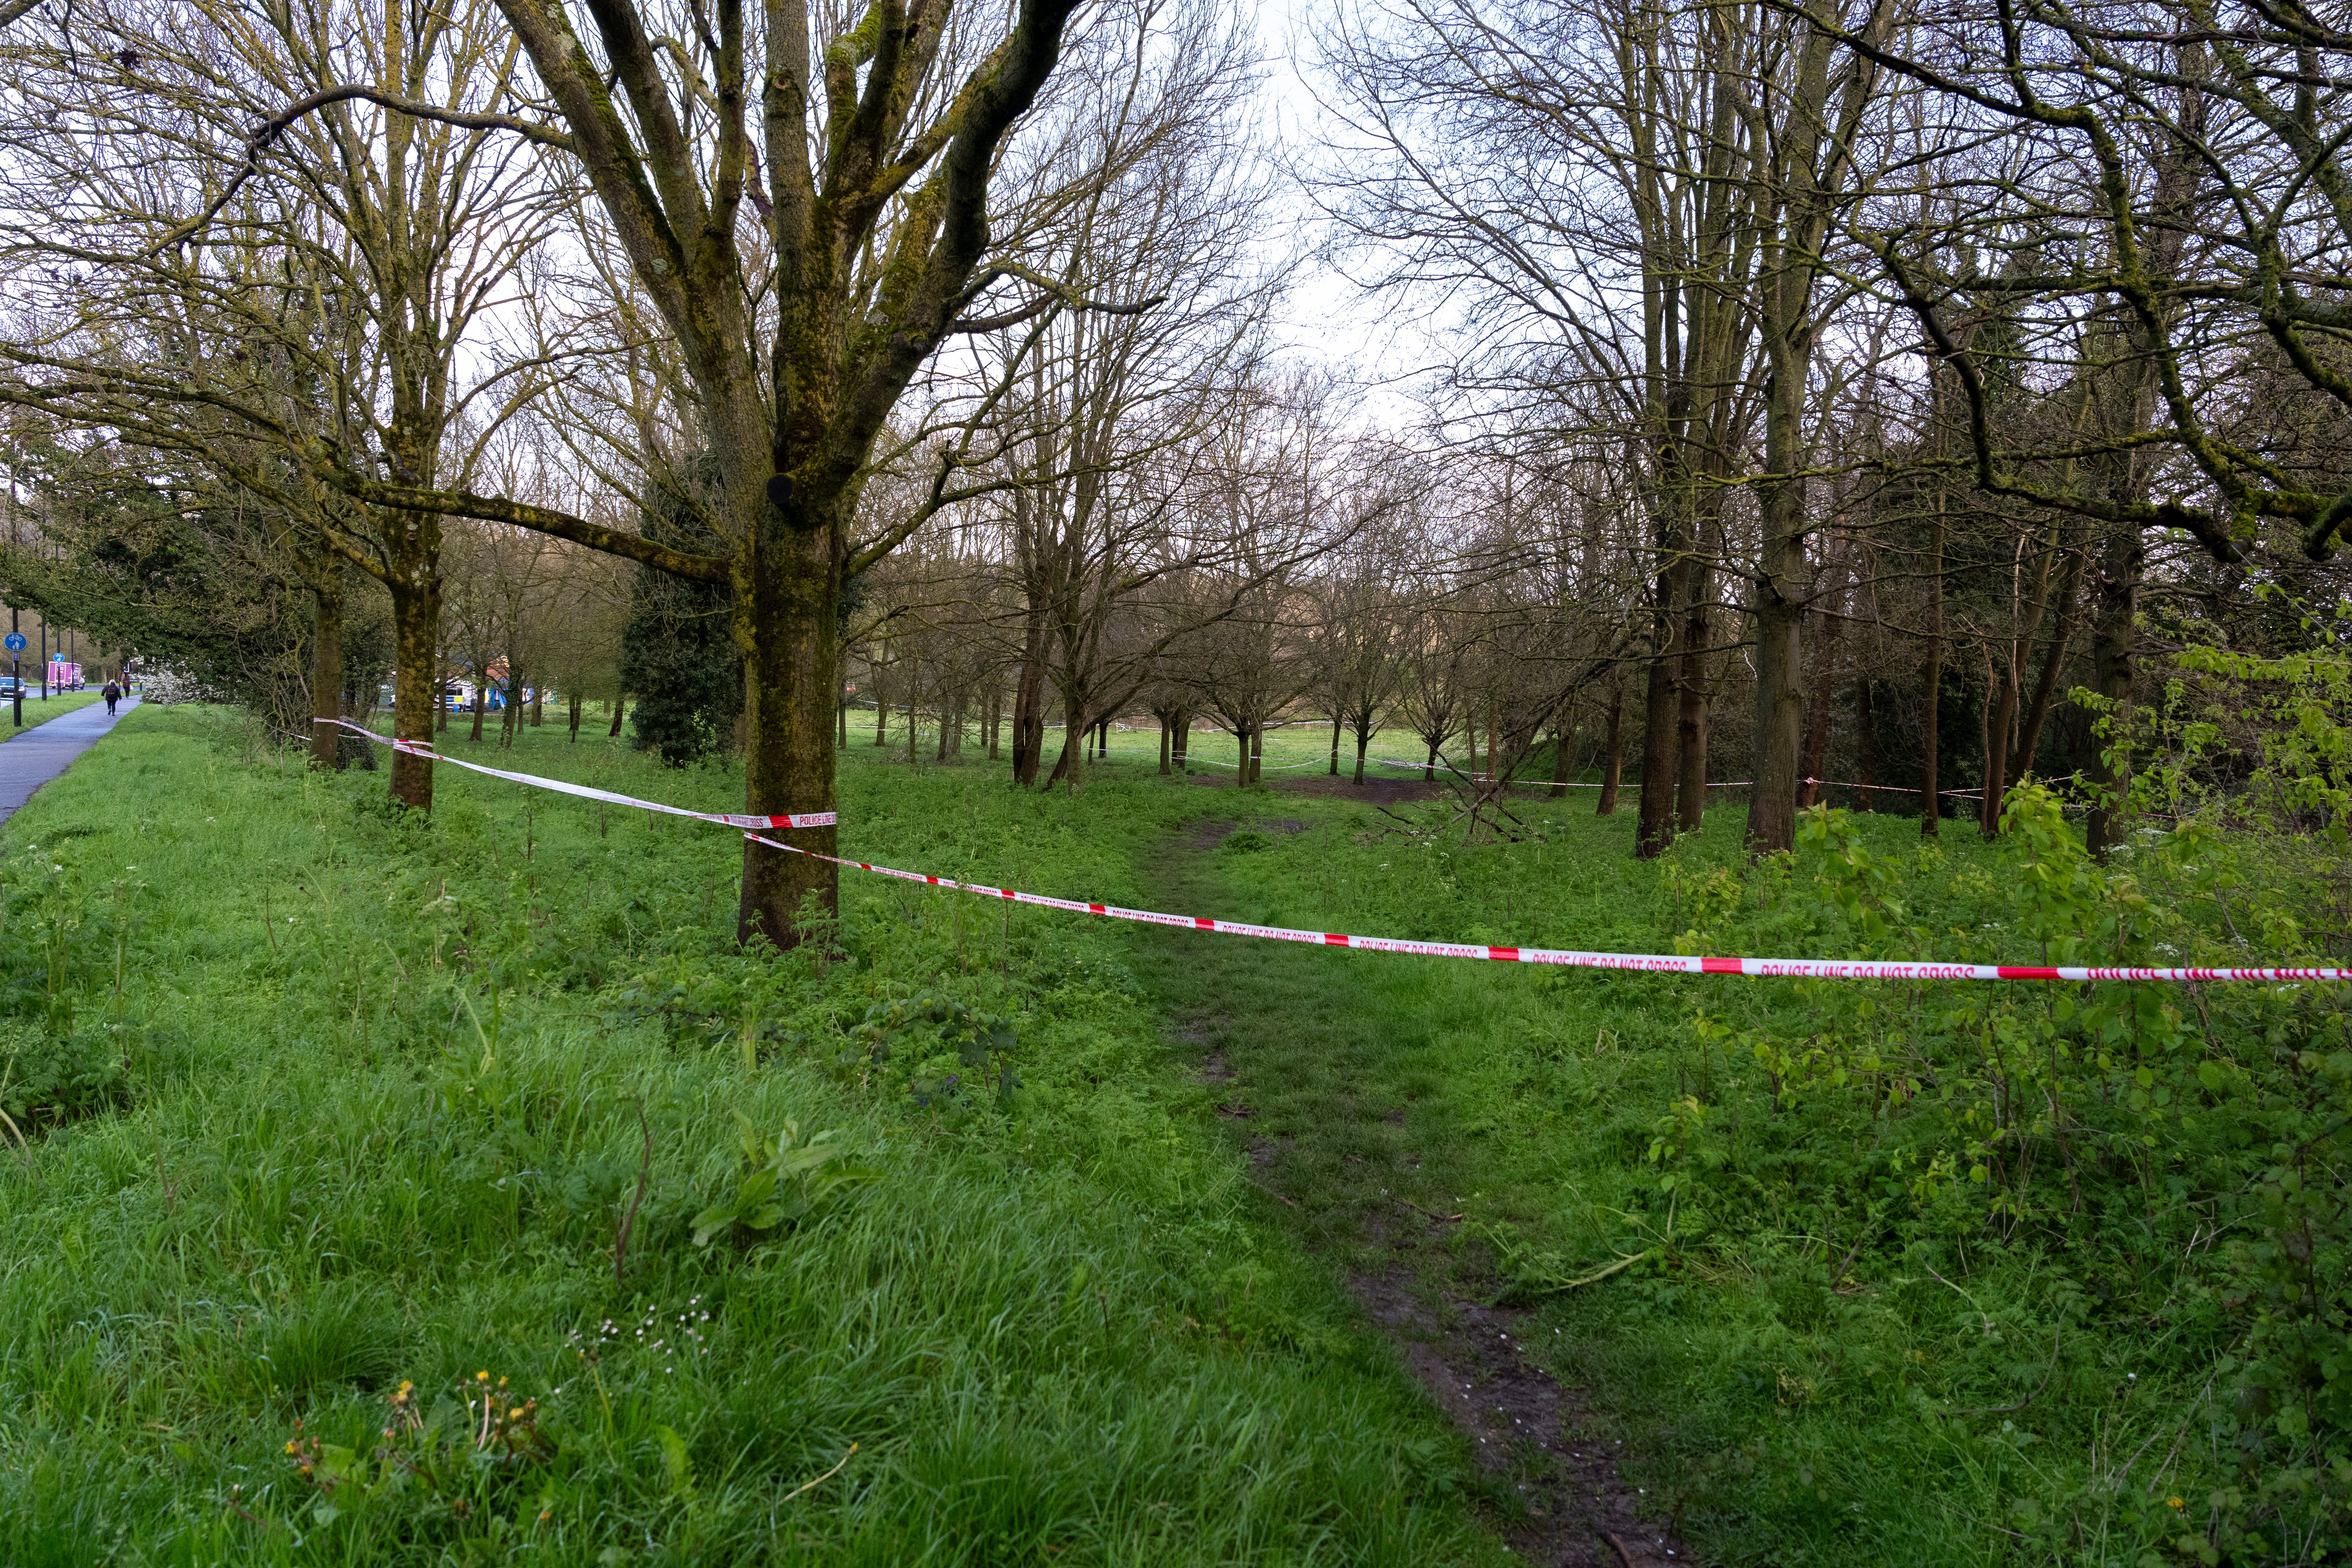 The force launched a murder investigation after it was alerted to the possible discovery of human remains in the park shortly after 9am on Tuesday